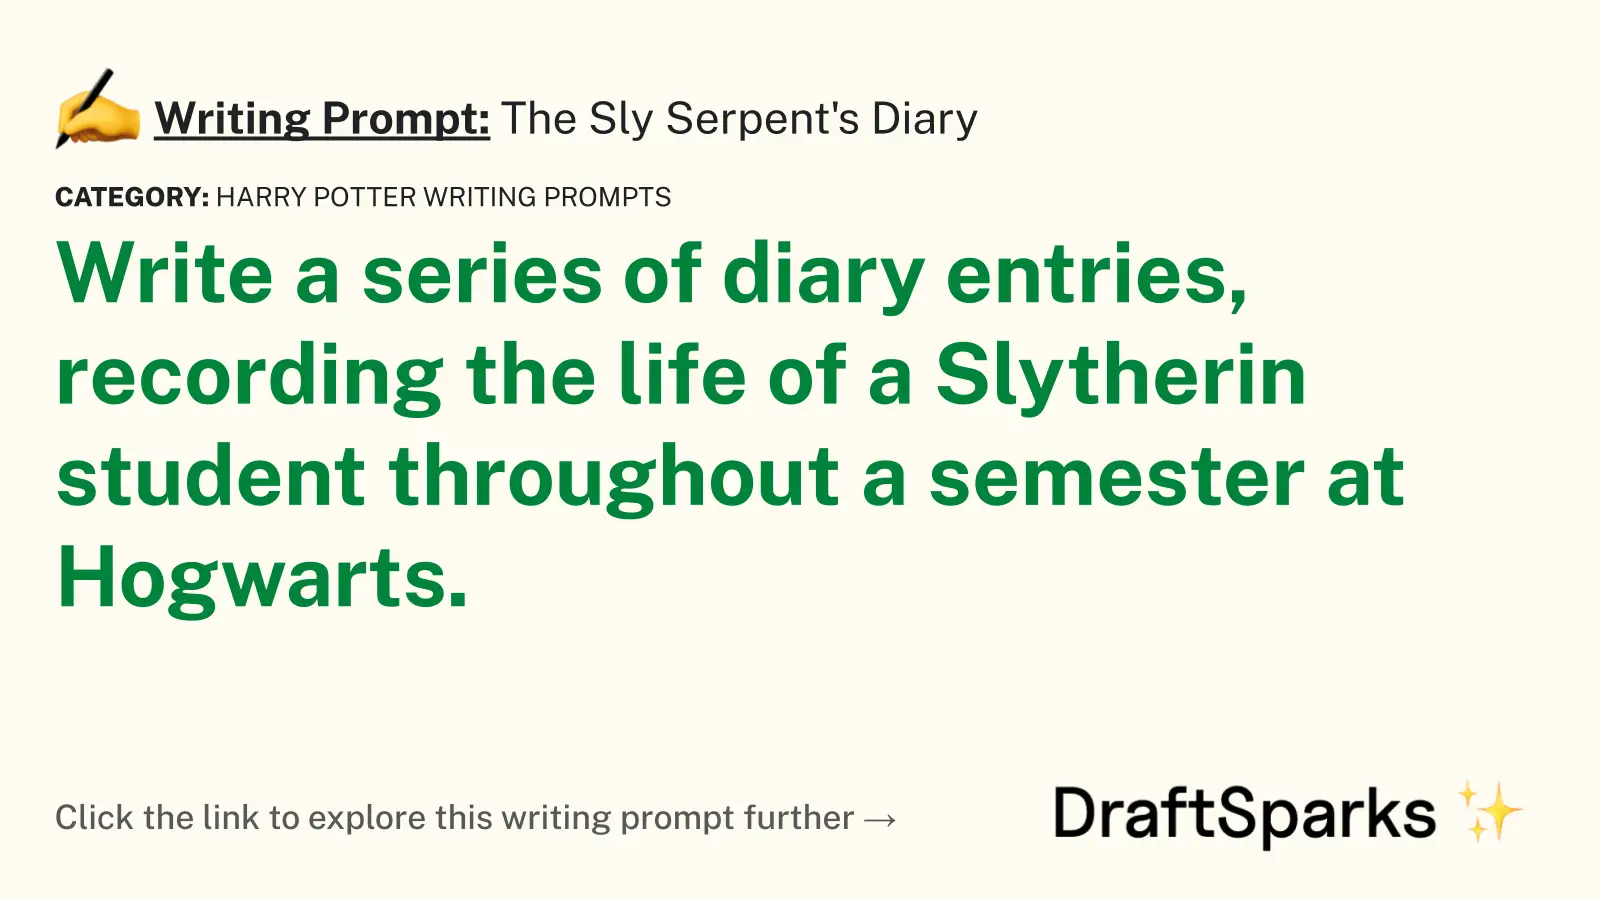 The Sly Serpent’s Diary